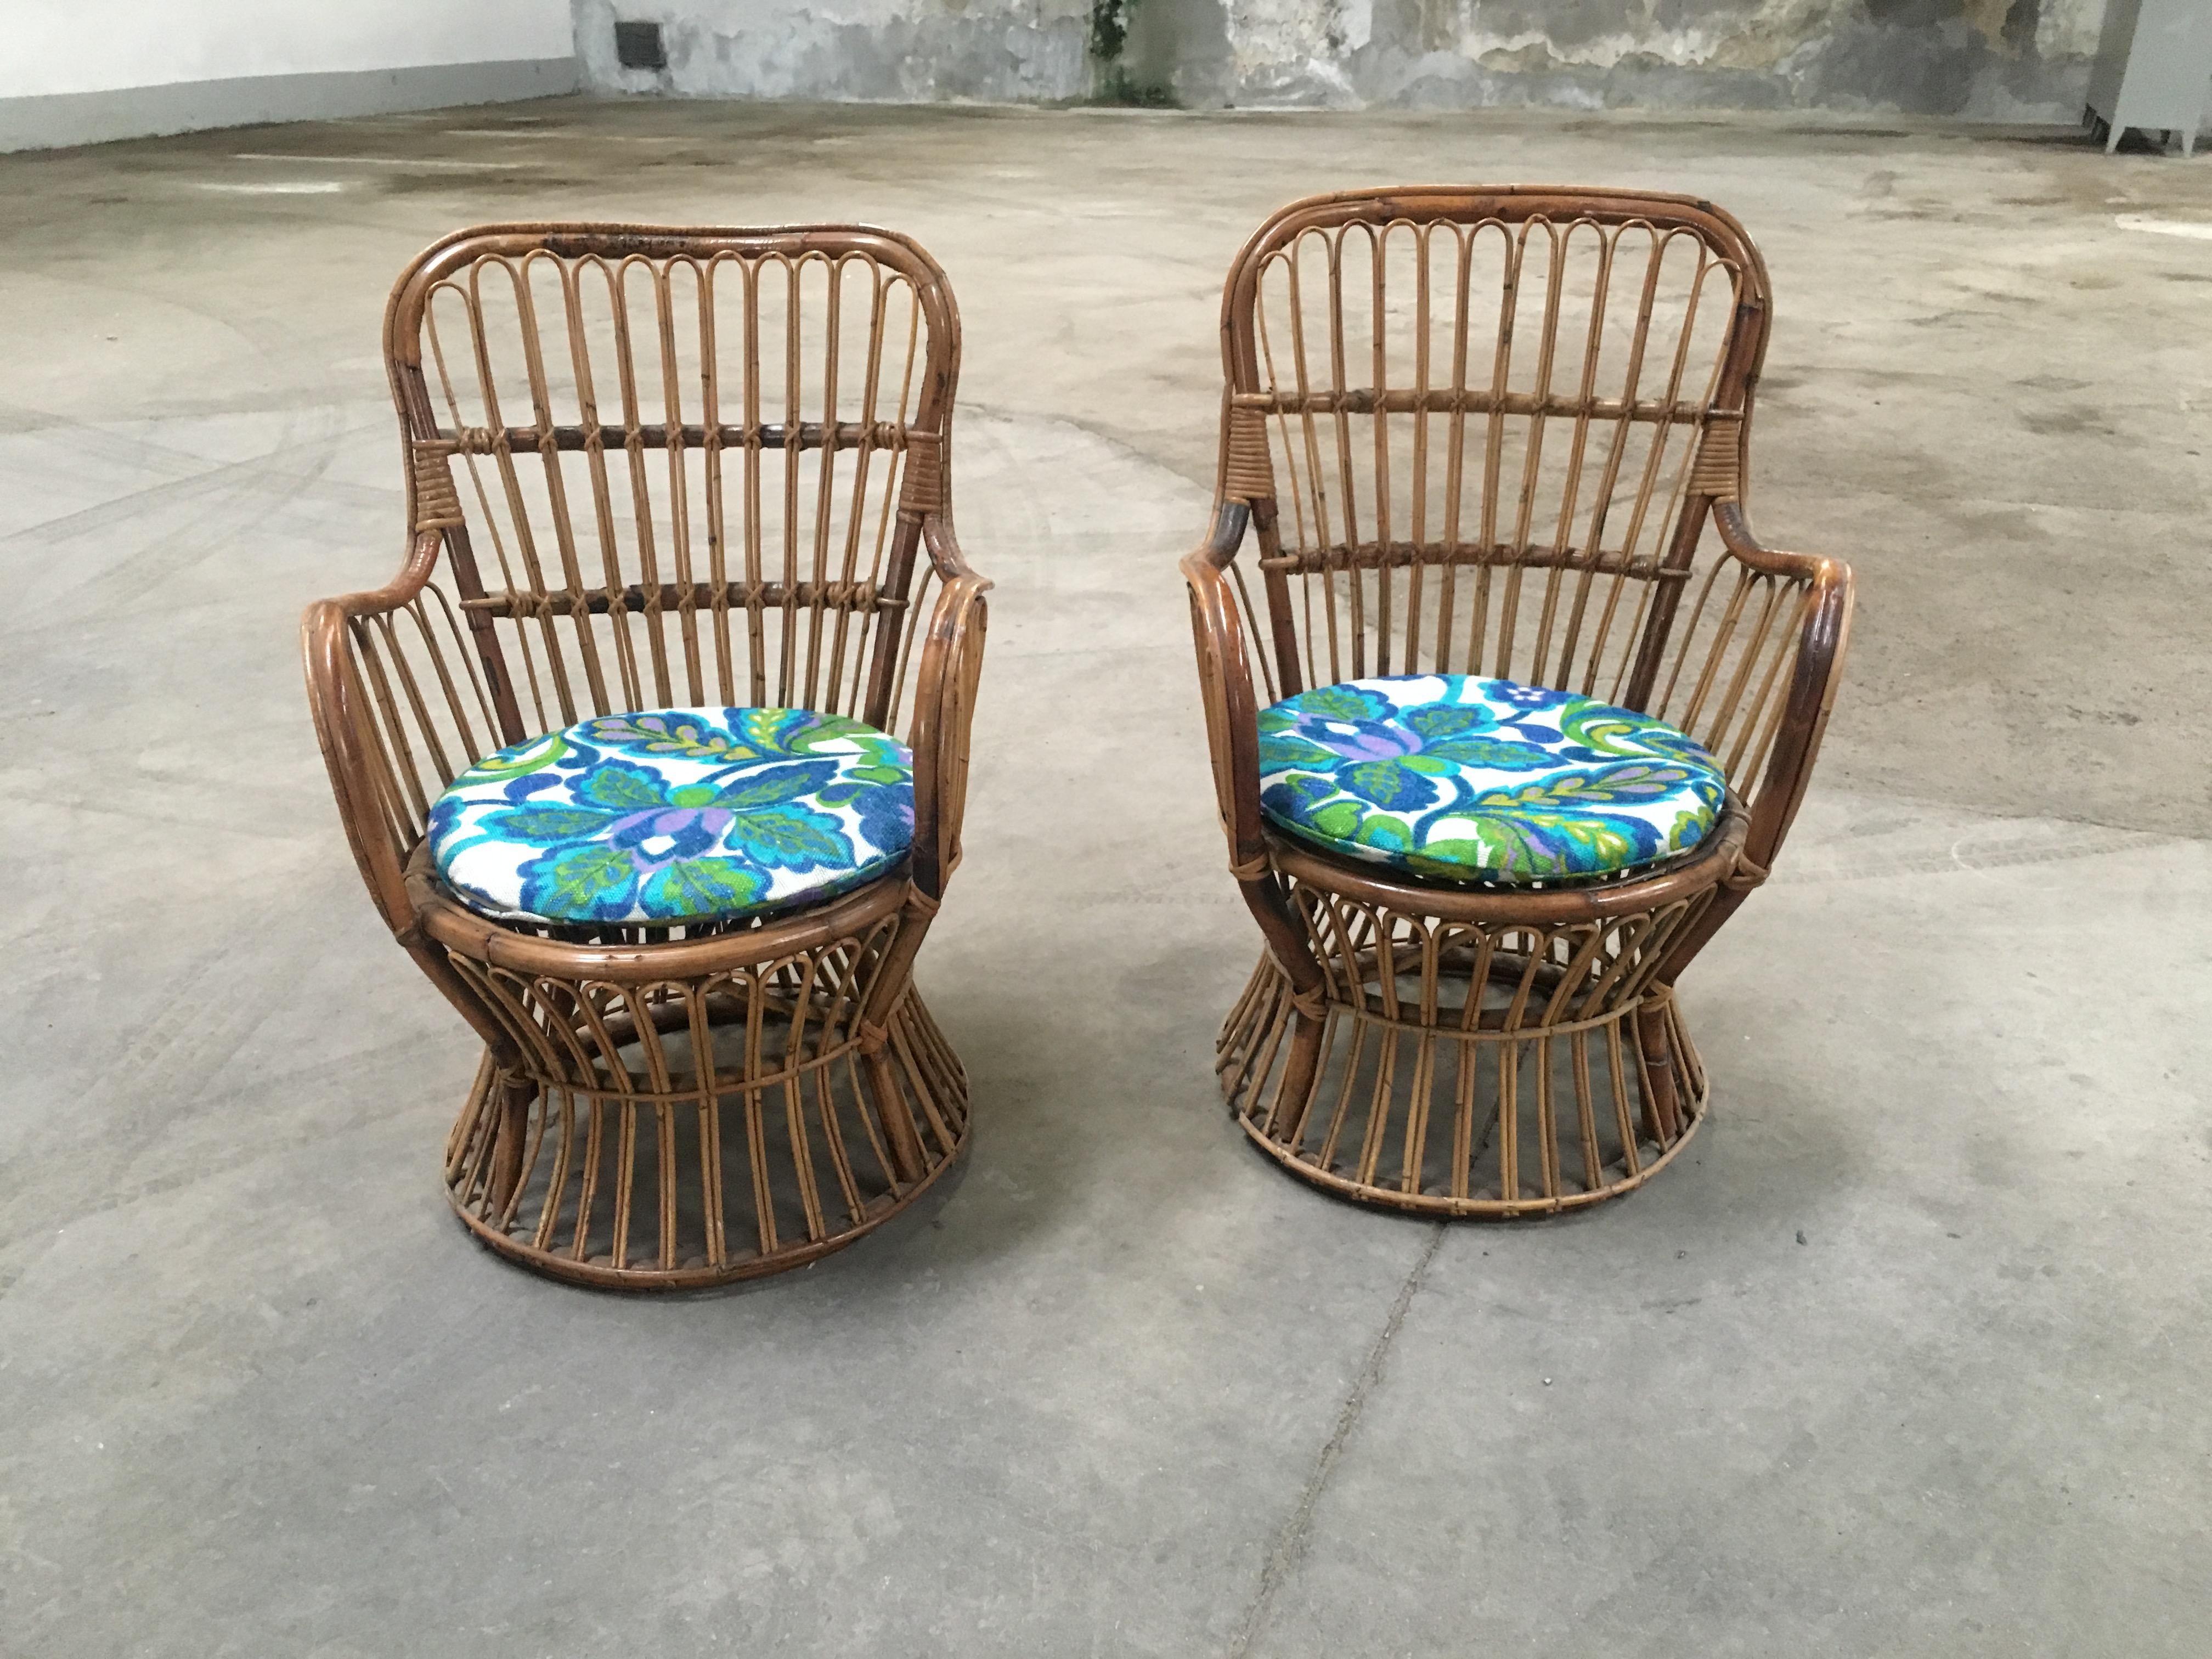 Mid-20th Century Midcentury Italian Bamboo and Rattan Living Room Set from 1950s